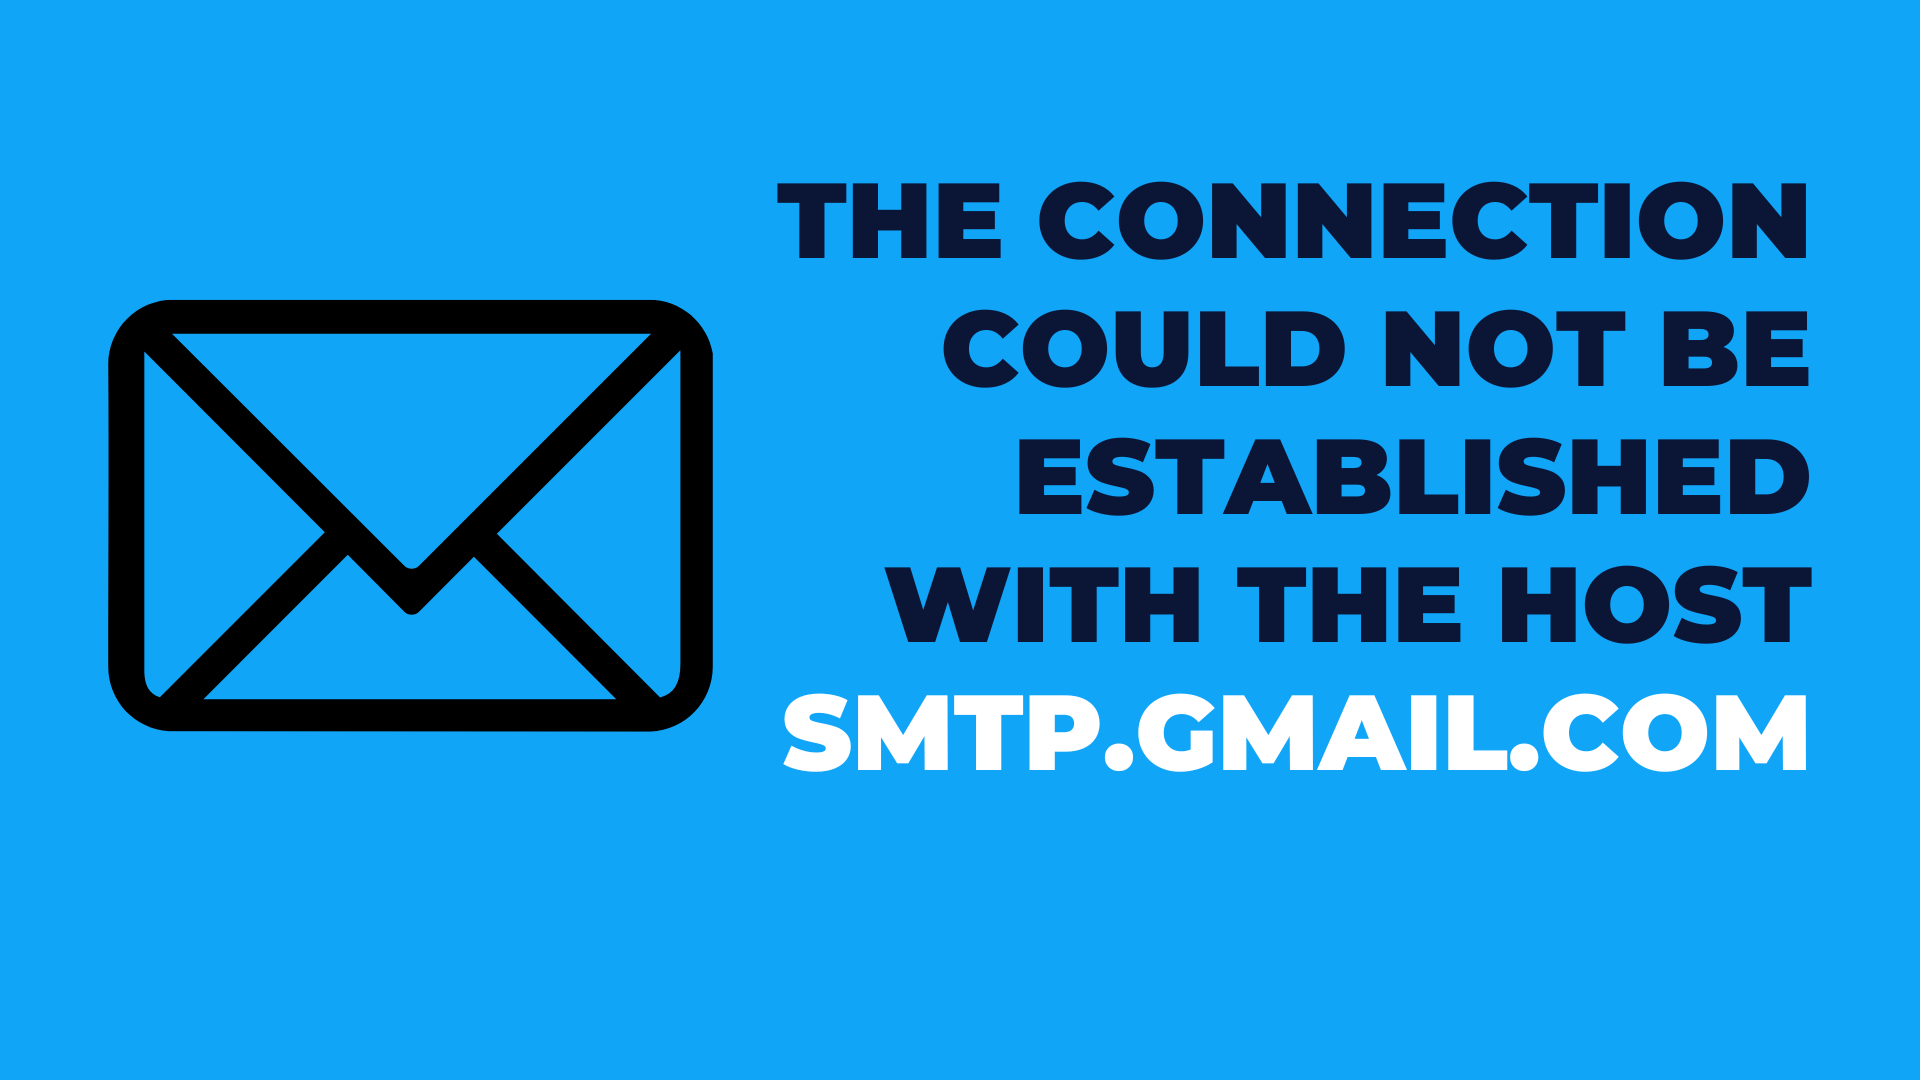 The connection could not be established with host smtp.gmail.com?